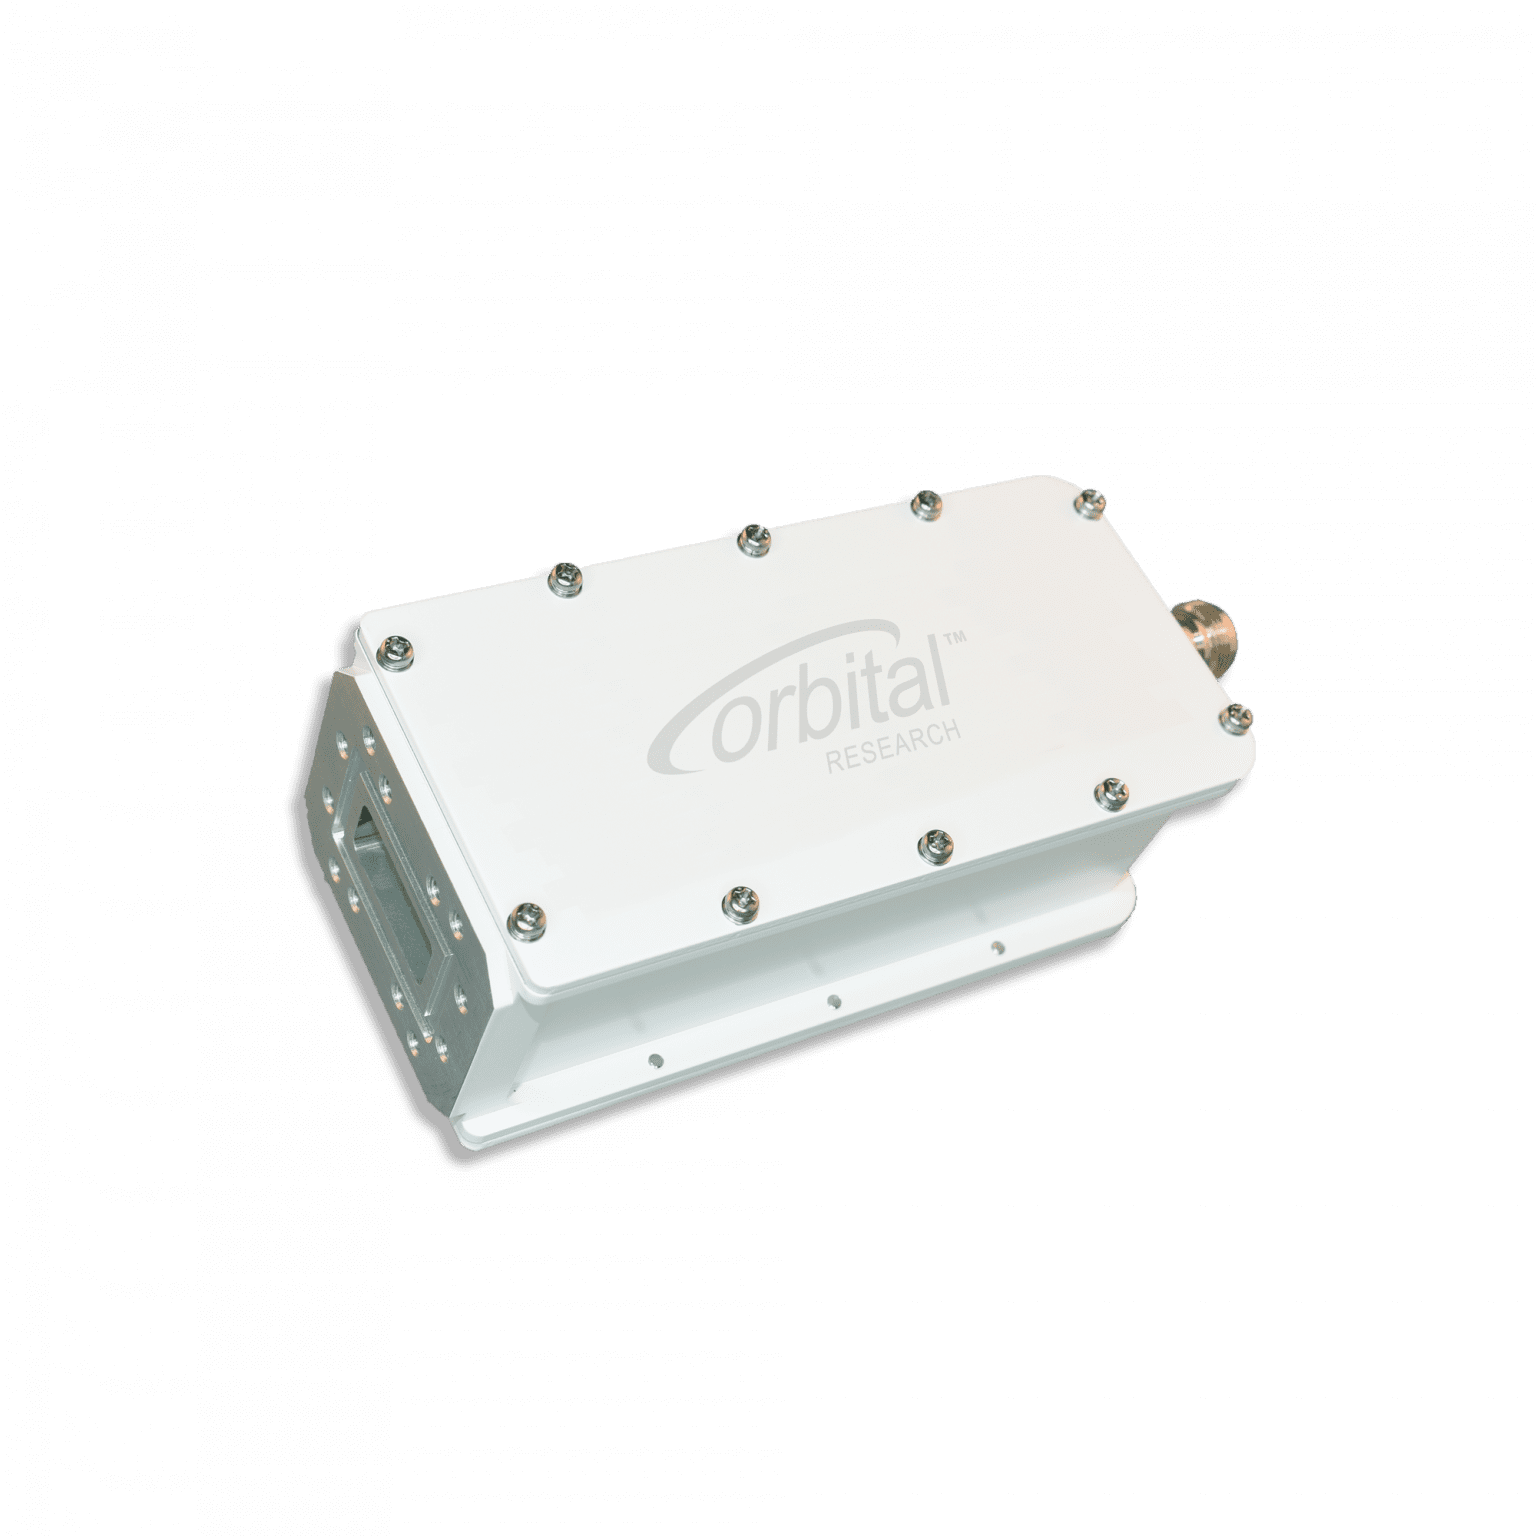 XMIC XBand LNB for Military Orbital ResearcH